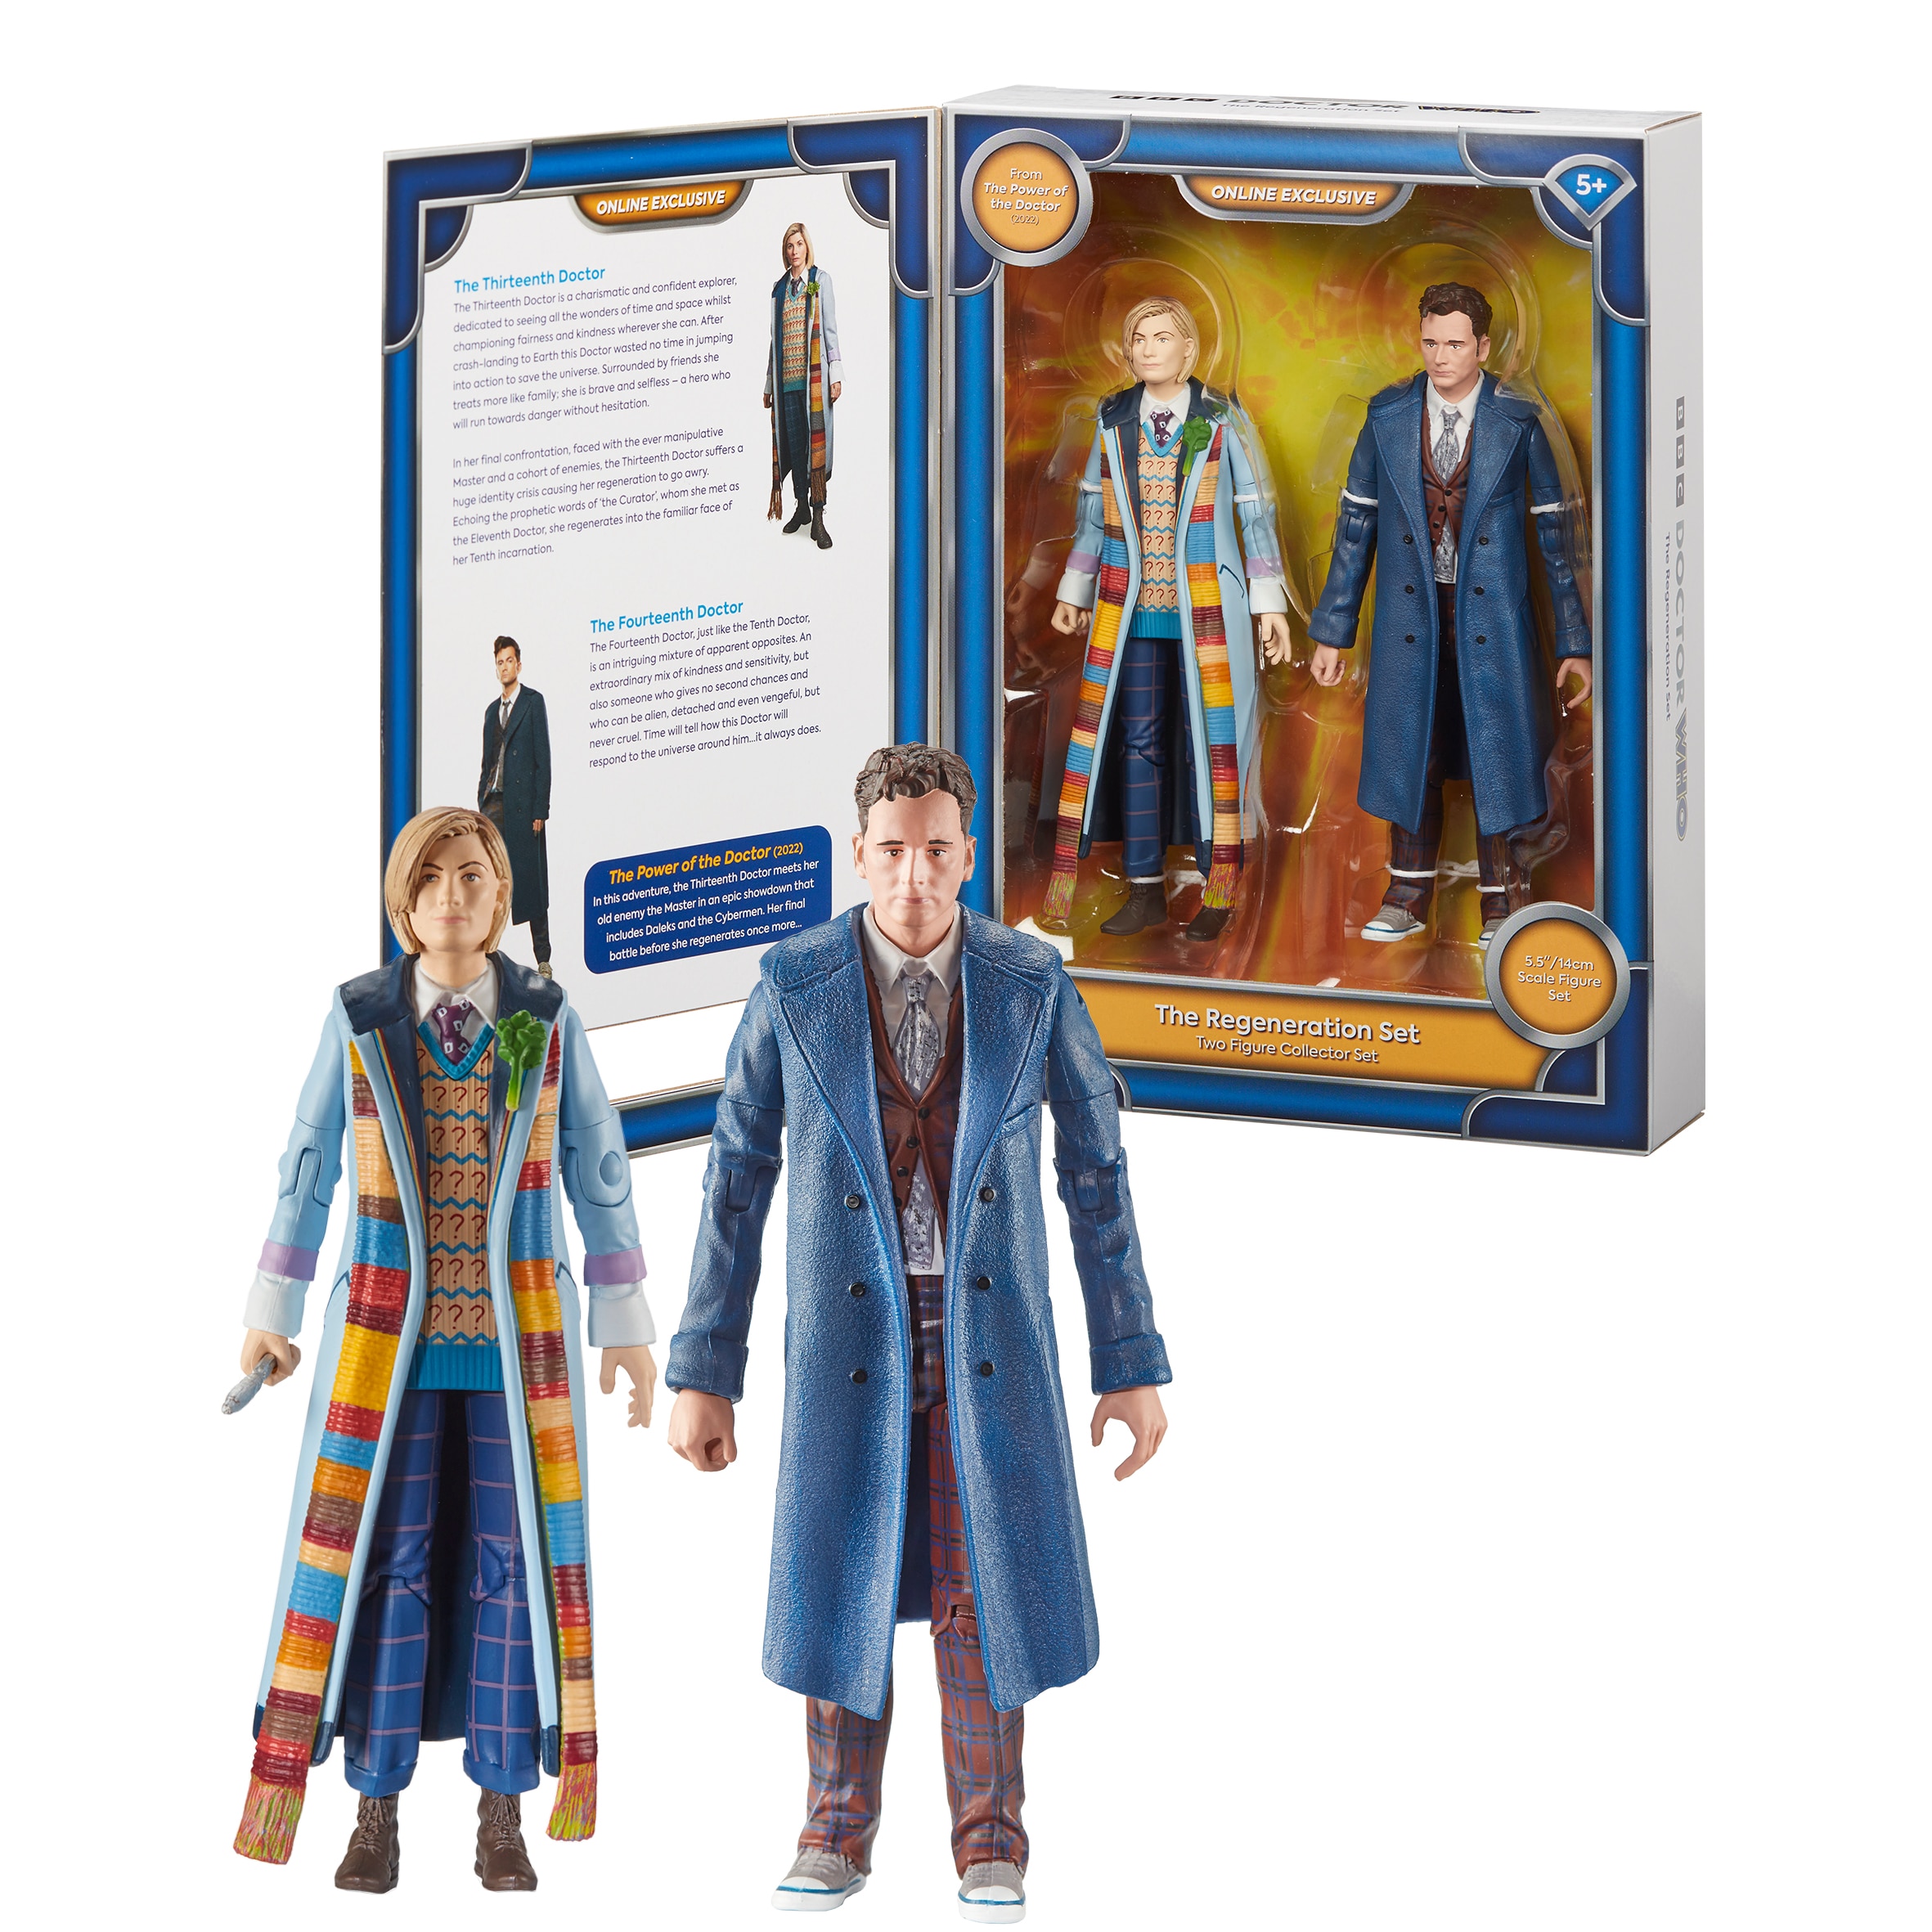 The Thirteenth Doctor and Fourteenth Doctor action figures, coming soon